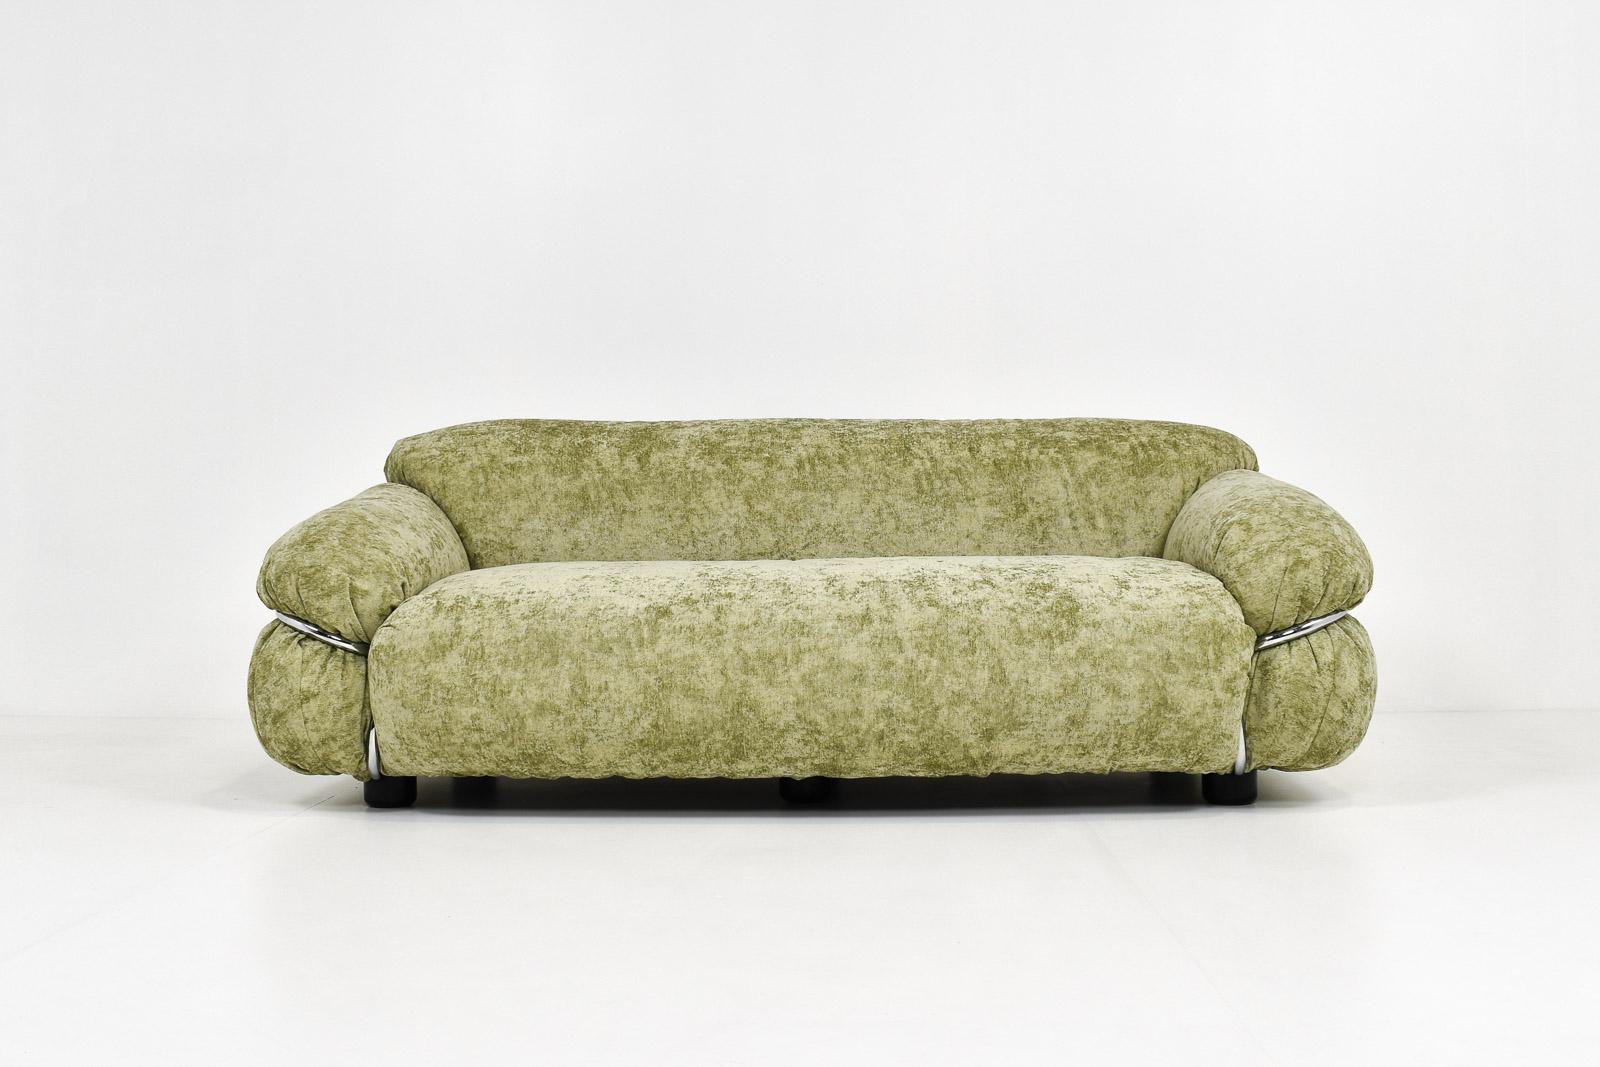 Original Cassina edition, designed by Gianfranco Frattini in 1969. 
Newly upholstered in high-quality sage green velvet fabric. 
Foam, fabric and chromed tubular metal frame in excellent condition.